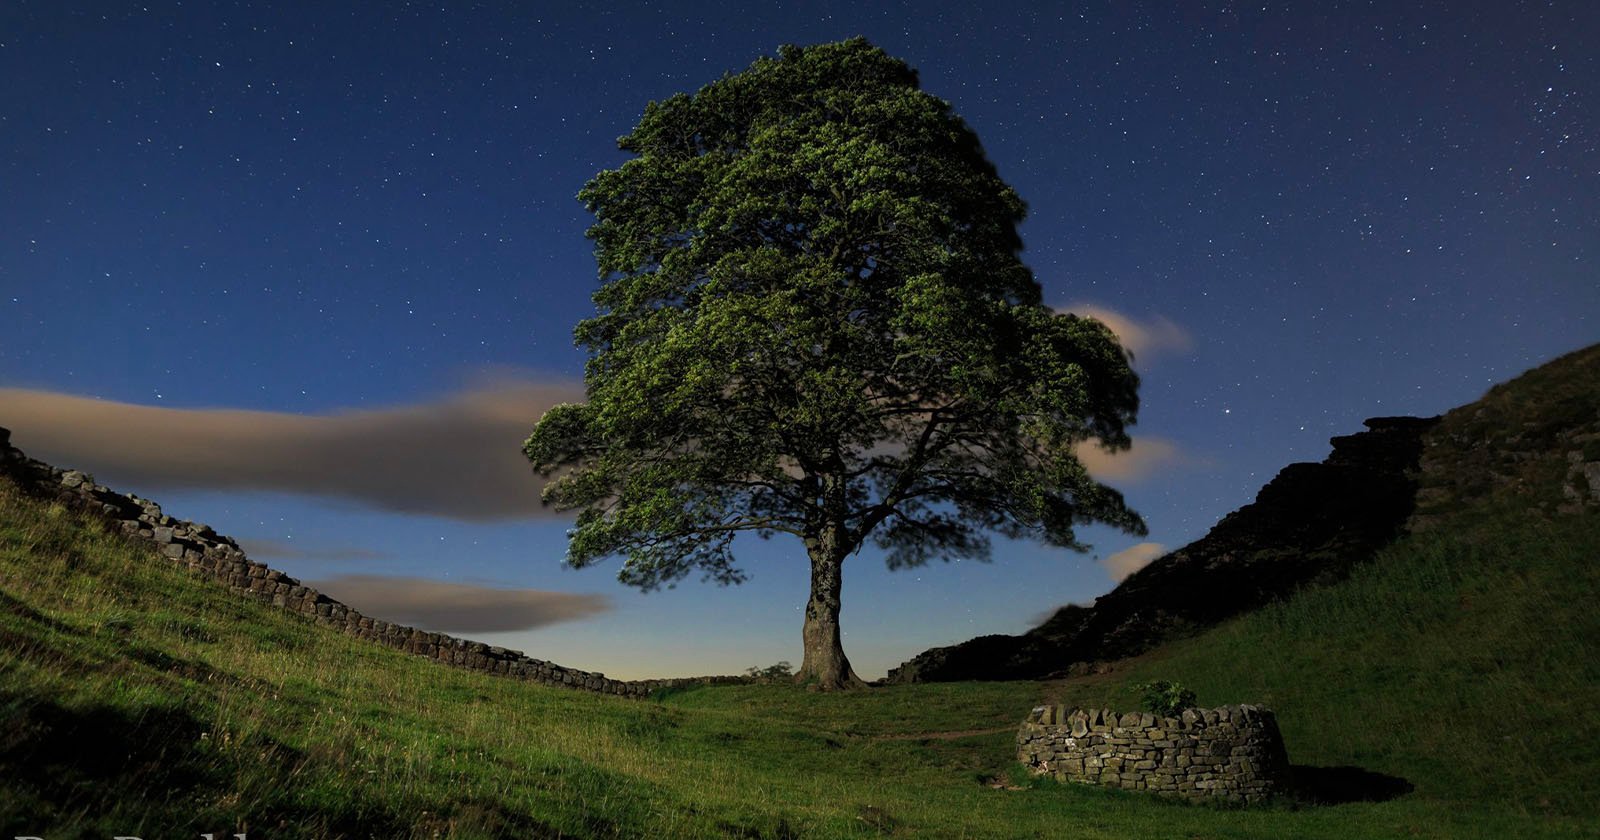 Photographers Left Devastated After Iconic Tree is Cut Down by Vandals